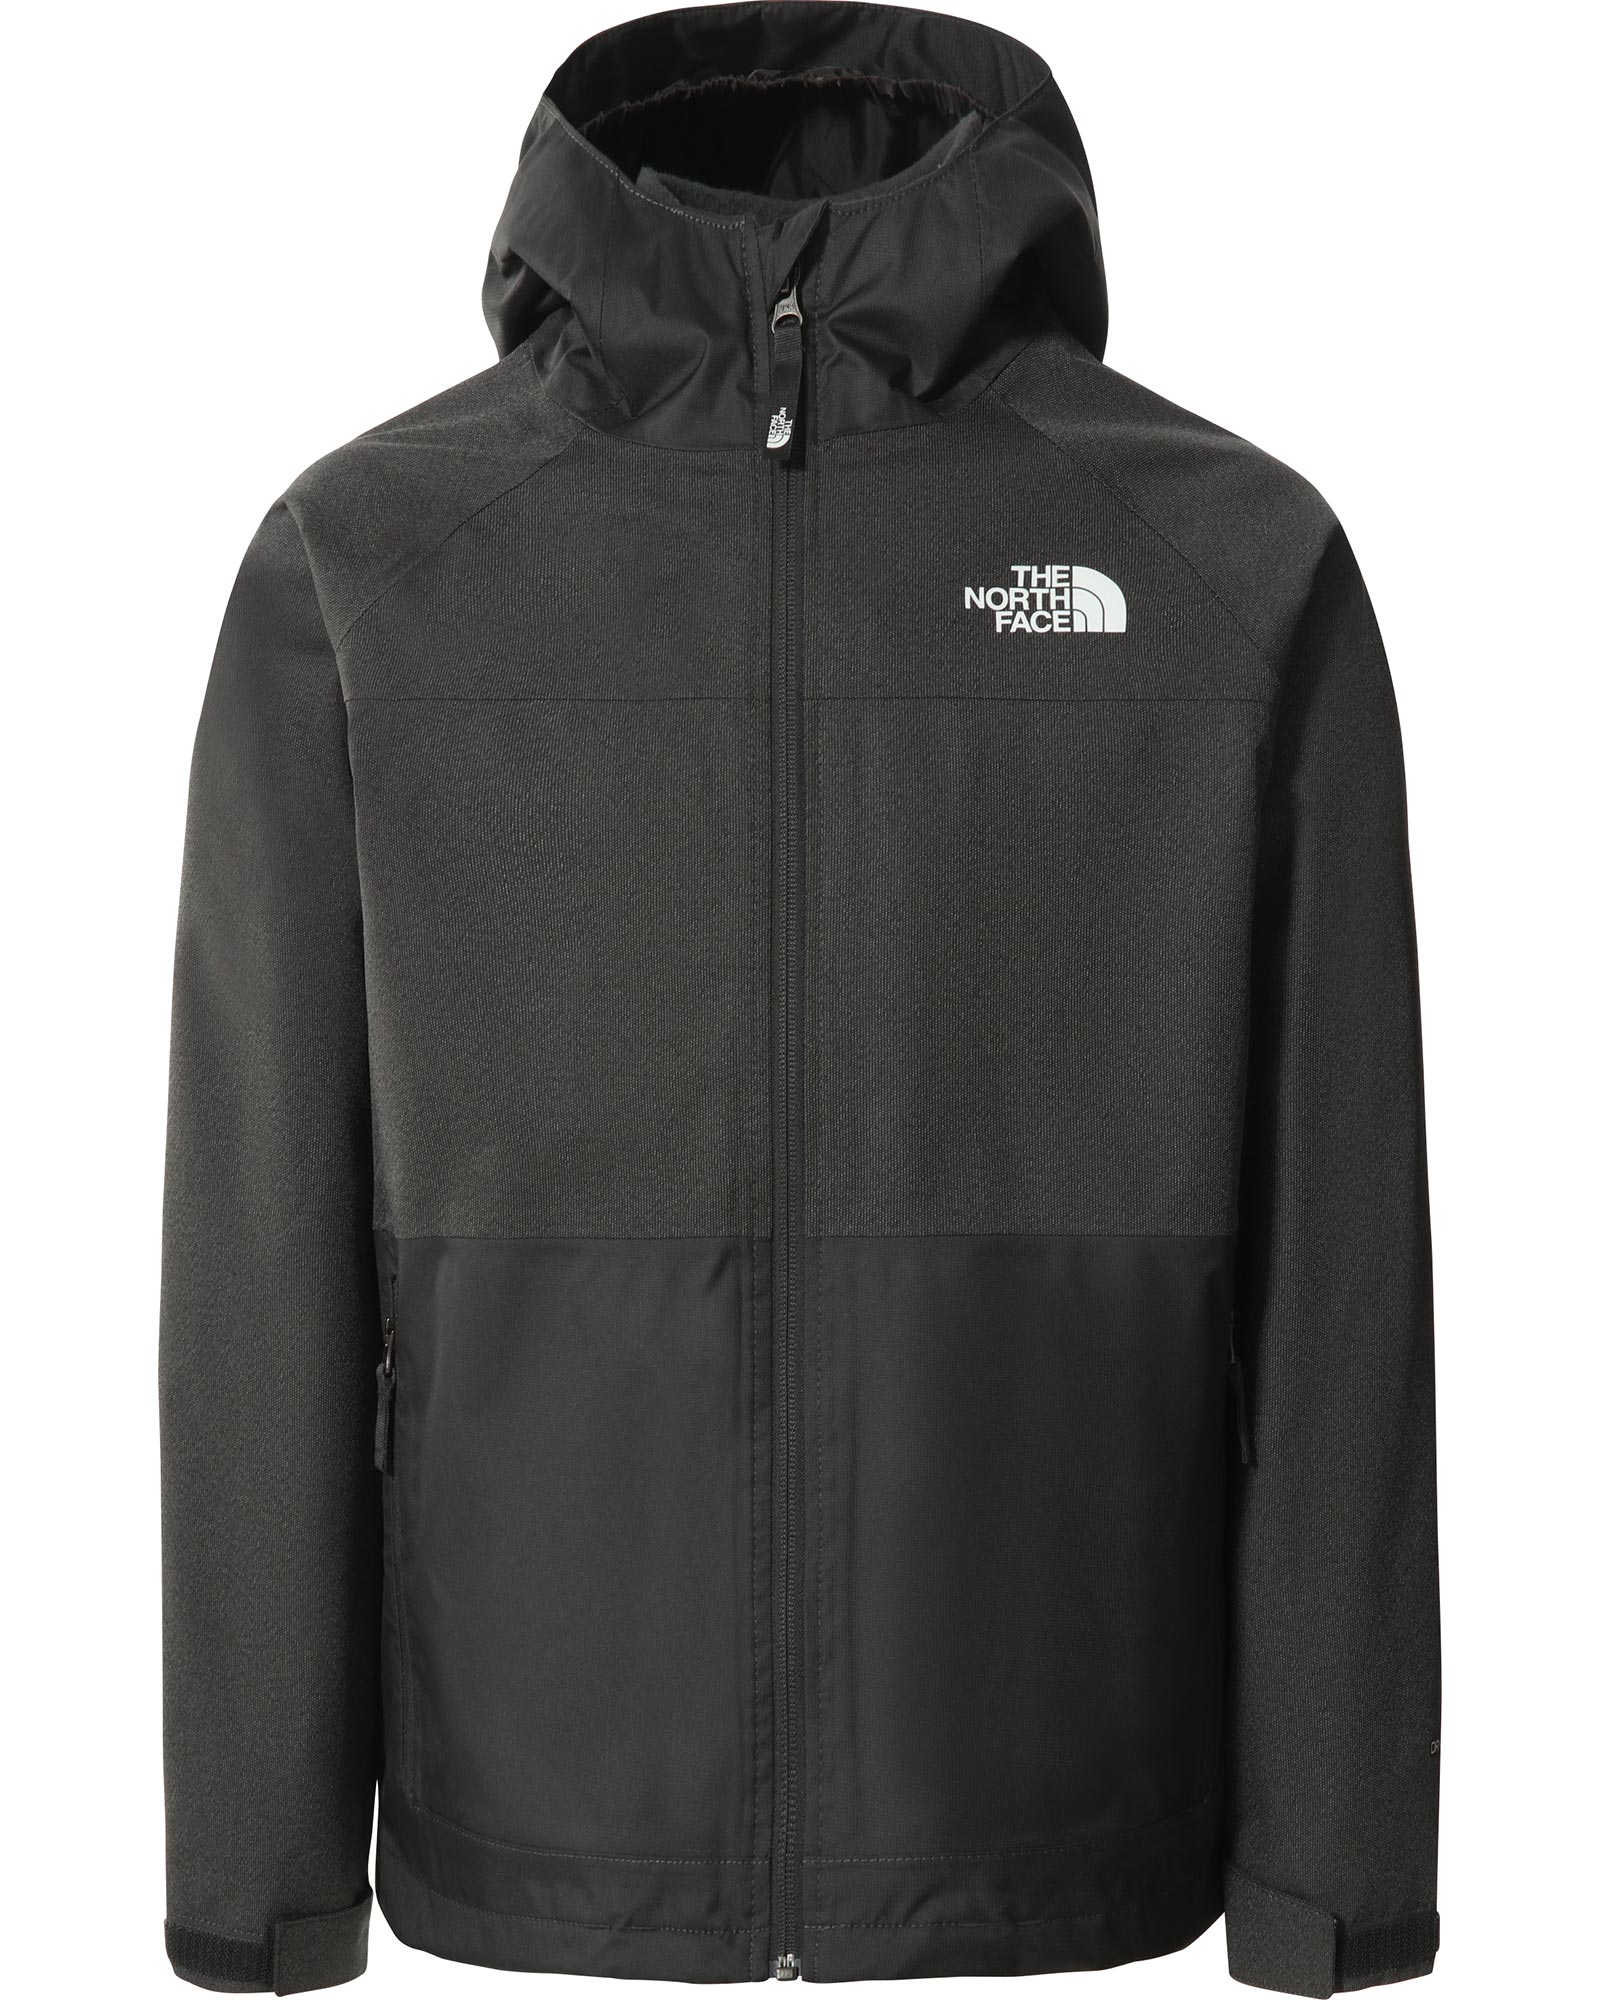 The North Face Vortex Boys Triclimate Jacket Xl